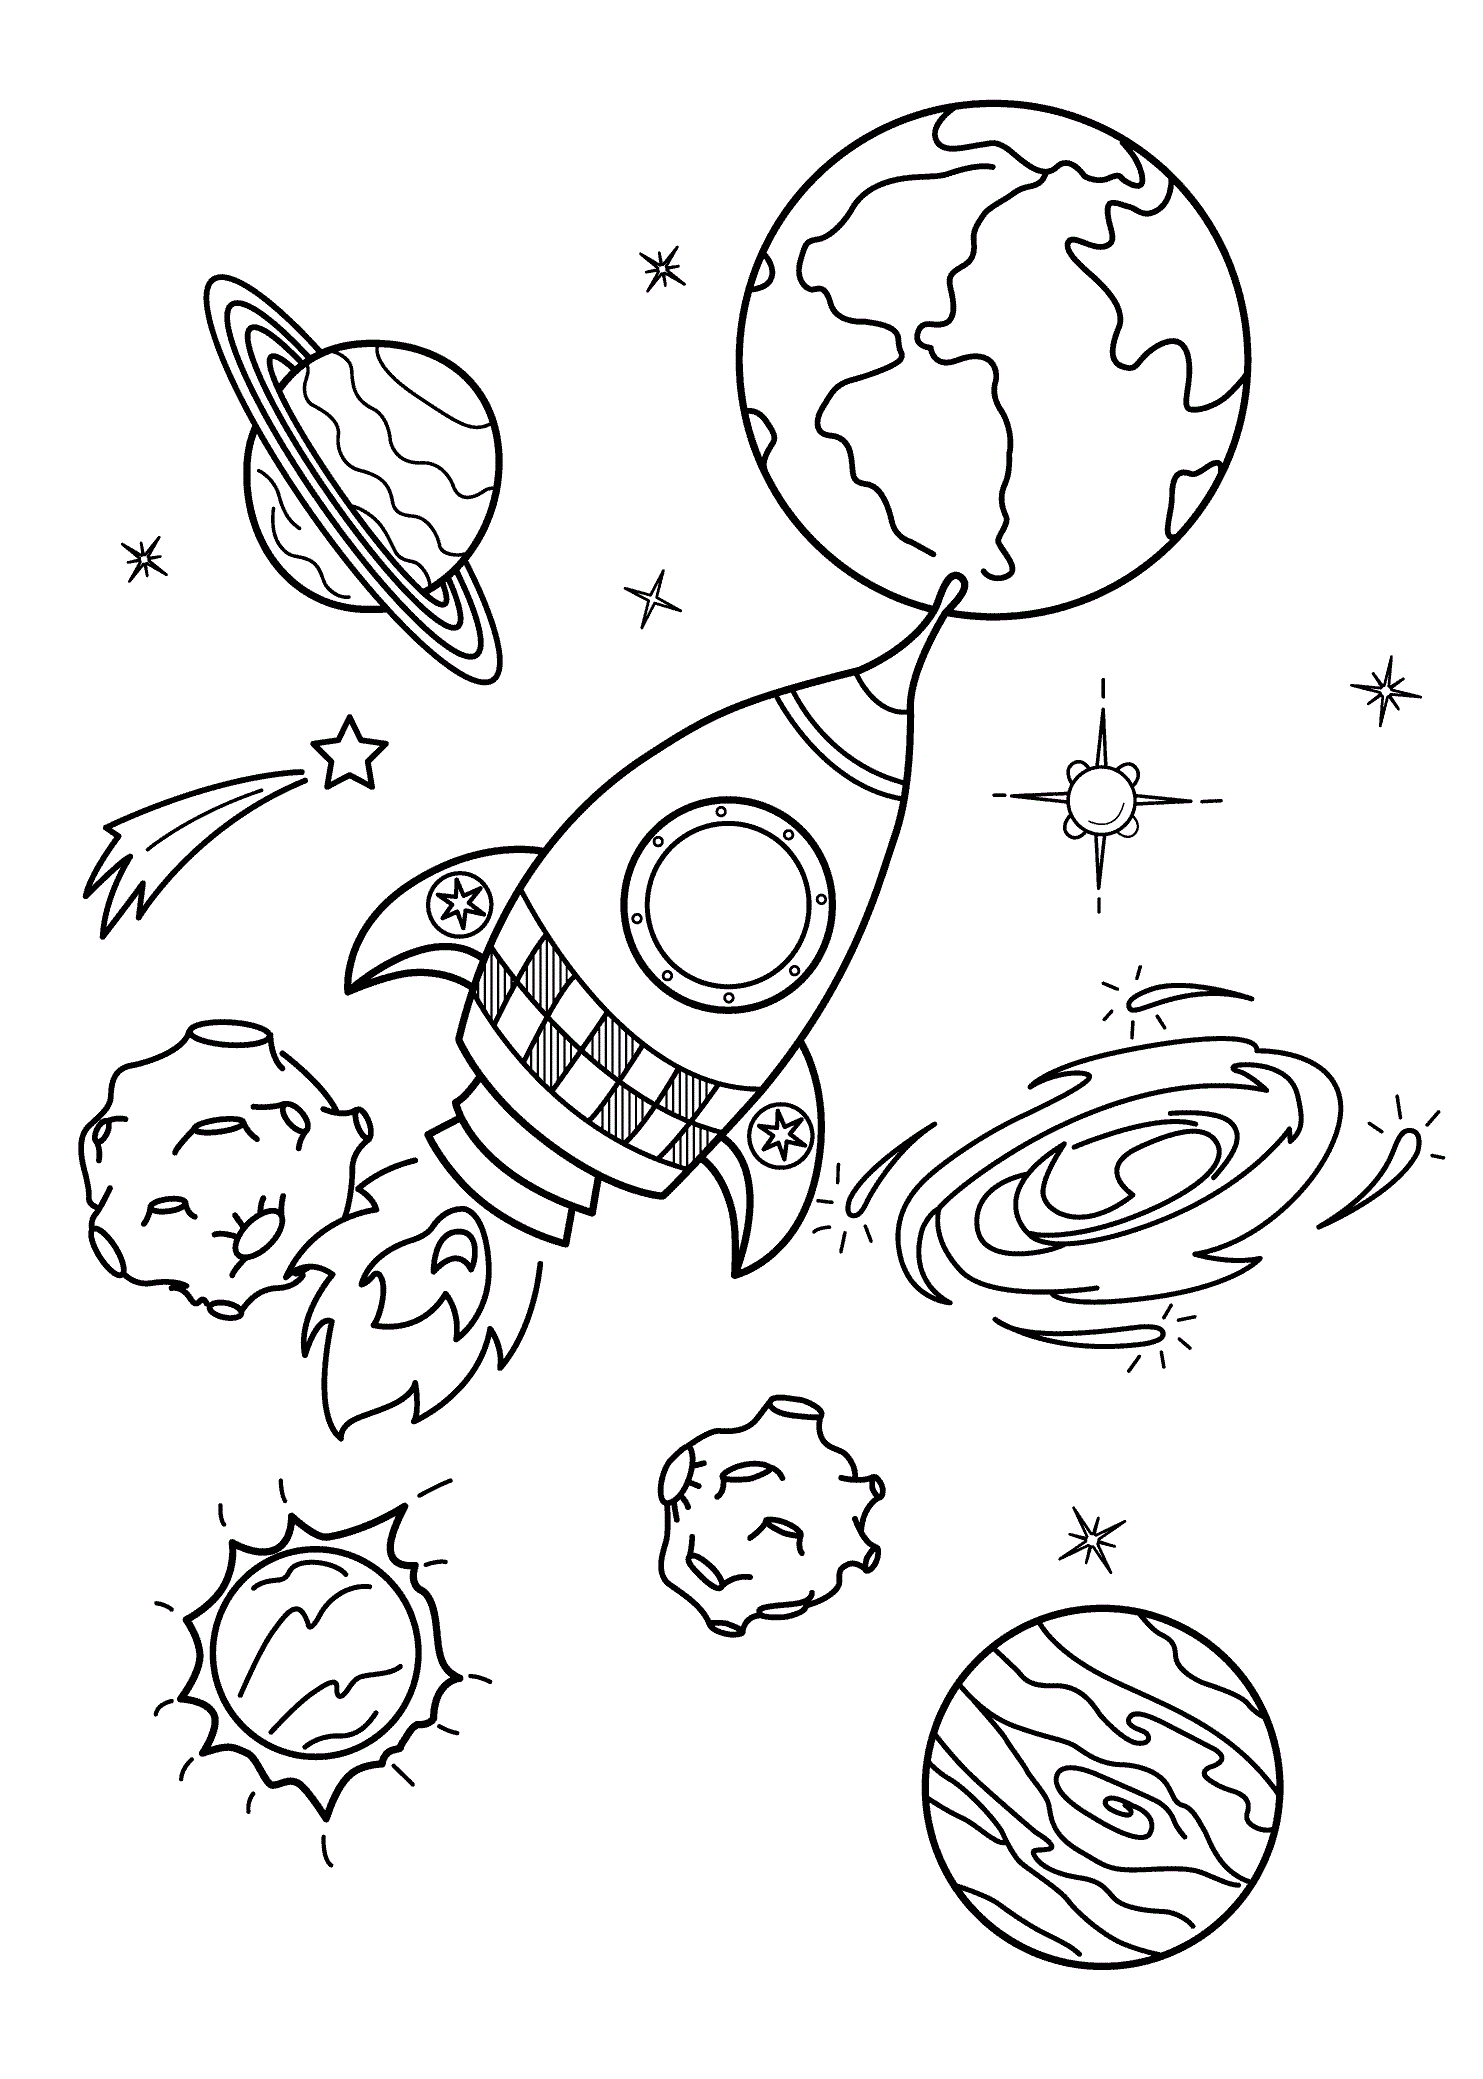 Spaceship And Planets Coloring Page   Free Printable ...